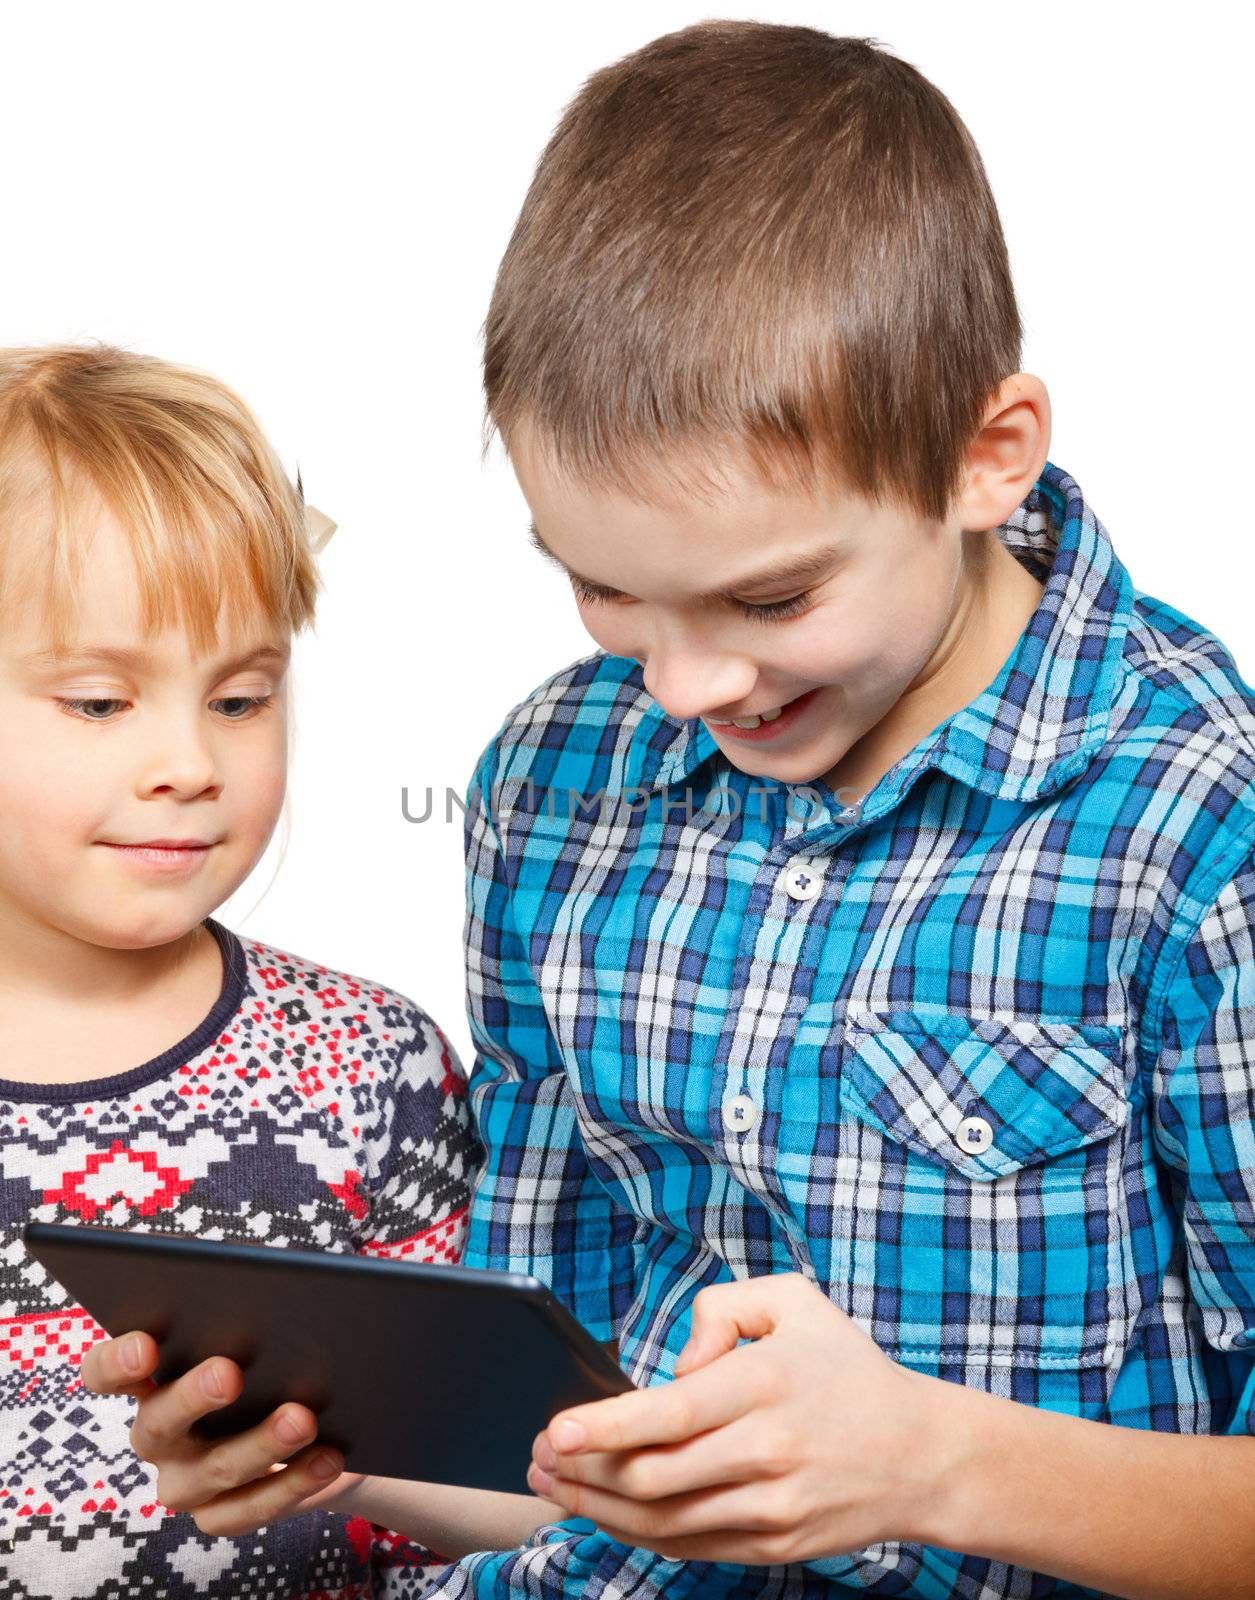 Children playing with a tablet computer by naumoid